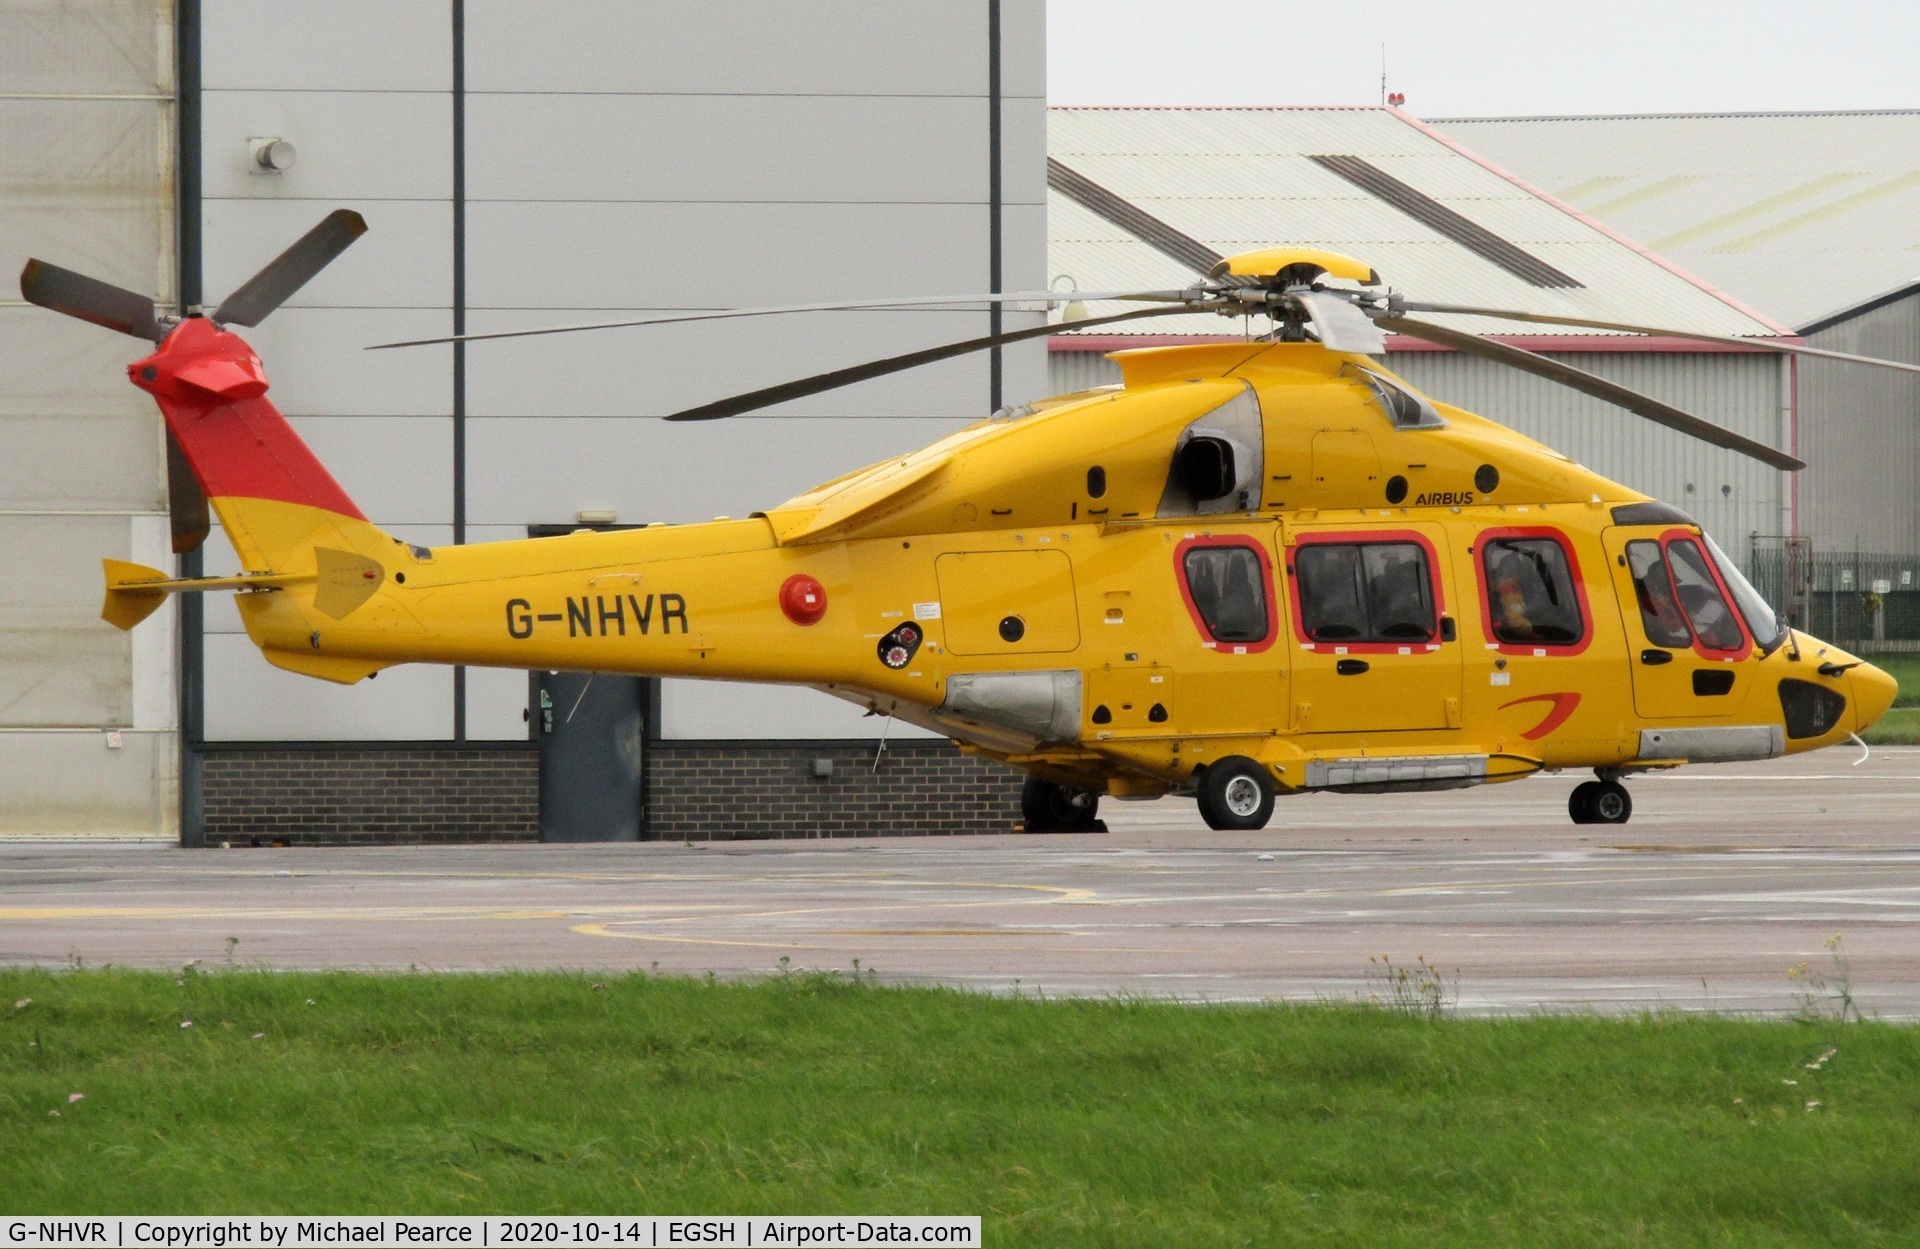 G-NHVR, 2018 Airbus Helicopters EC-175B C/N 5033, Parked at SaxonAir after arrival from Den Helder (DHR).